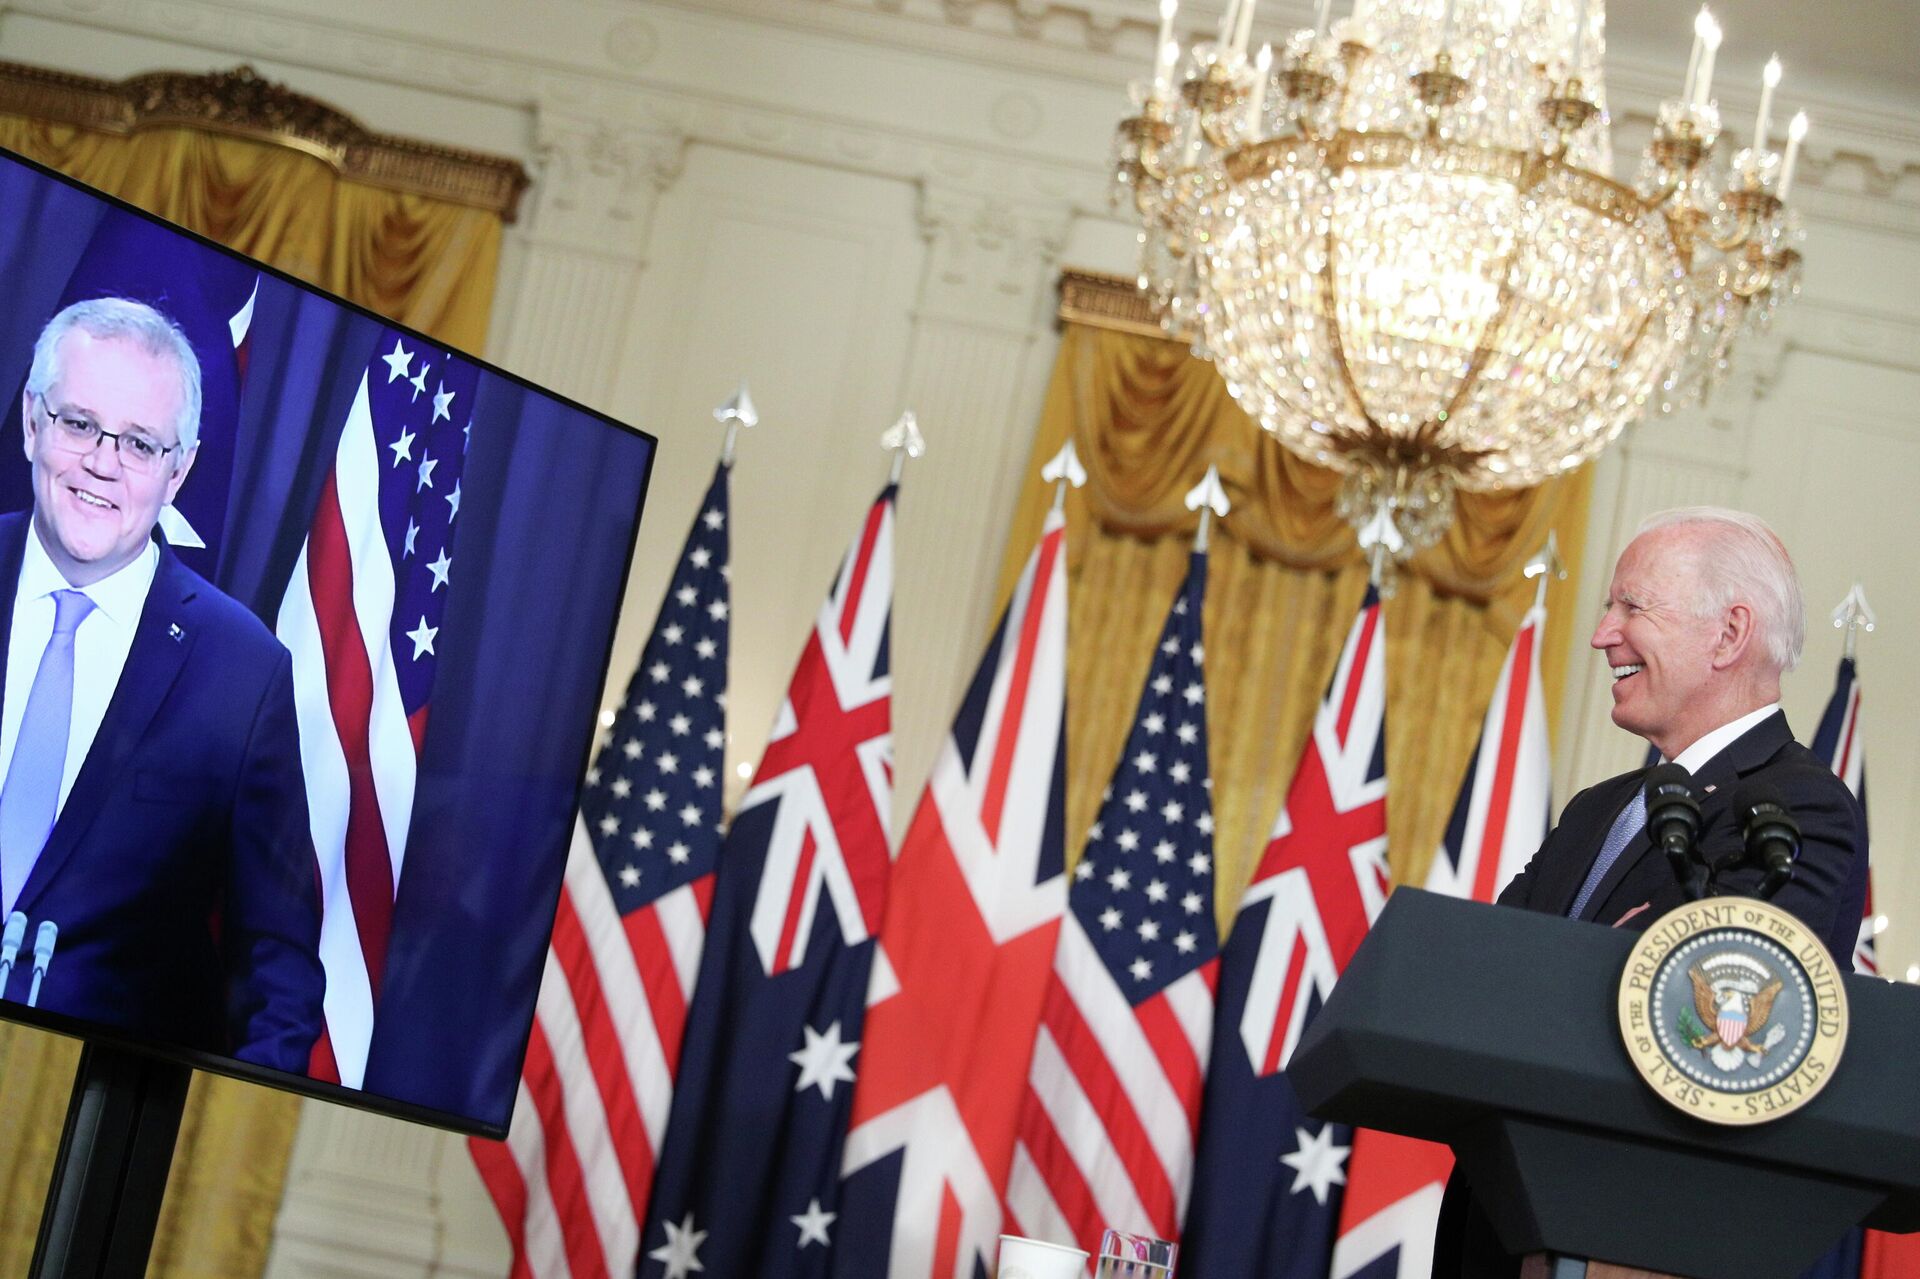 U.S. President Joe Biden smiles while delivering remarks on a National Security Initiative virtually with Australian Prime Minister Scott Morrison and British Prime Minister Boris Johnson (not pictured) inside the East Room at the White House in Washington, U.S., September 15, 2021 - Sputnik International, 1920, 16.09.2021